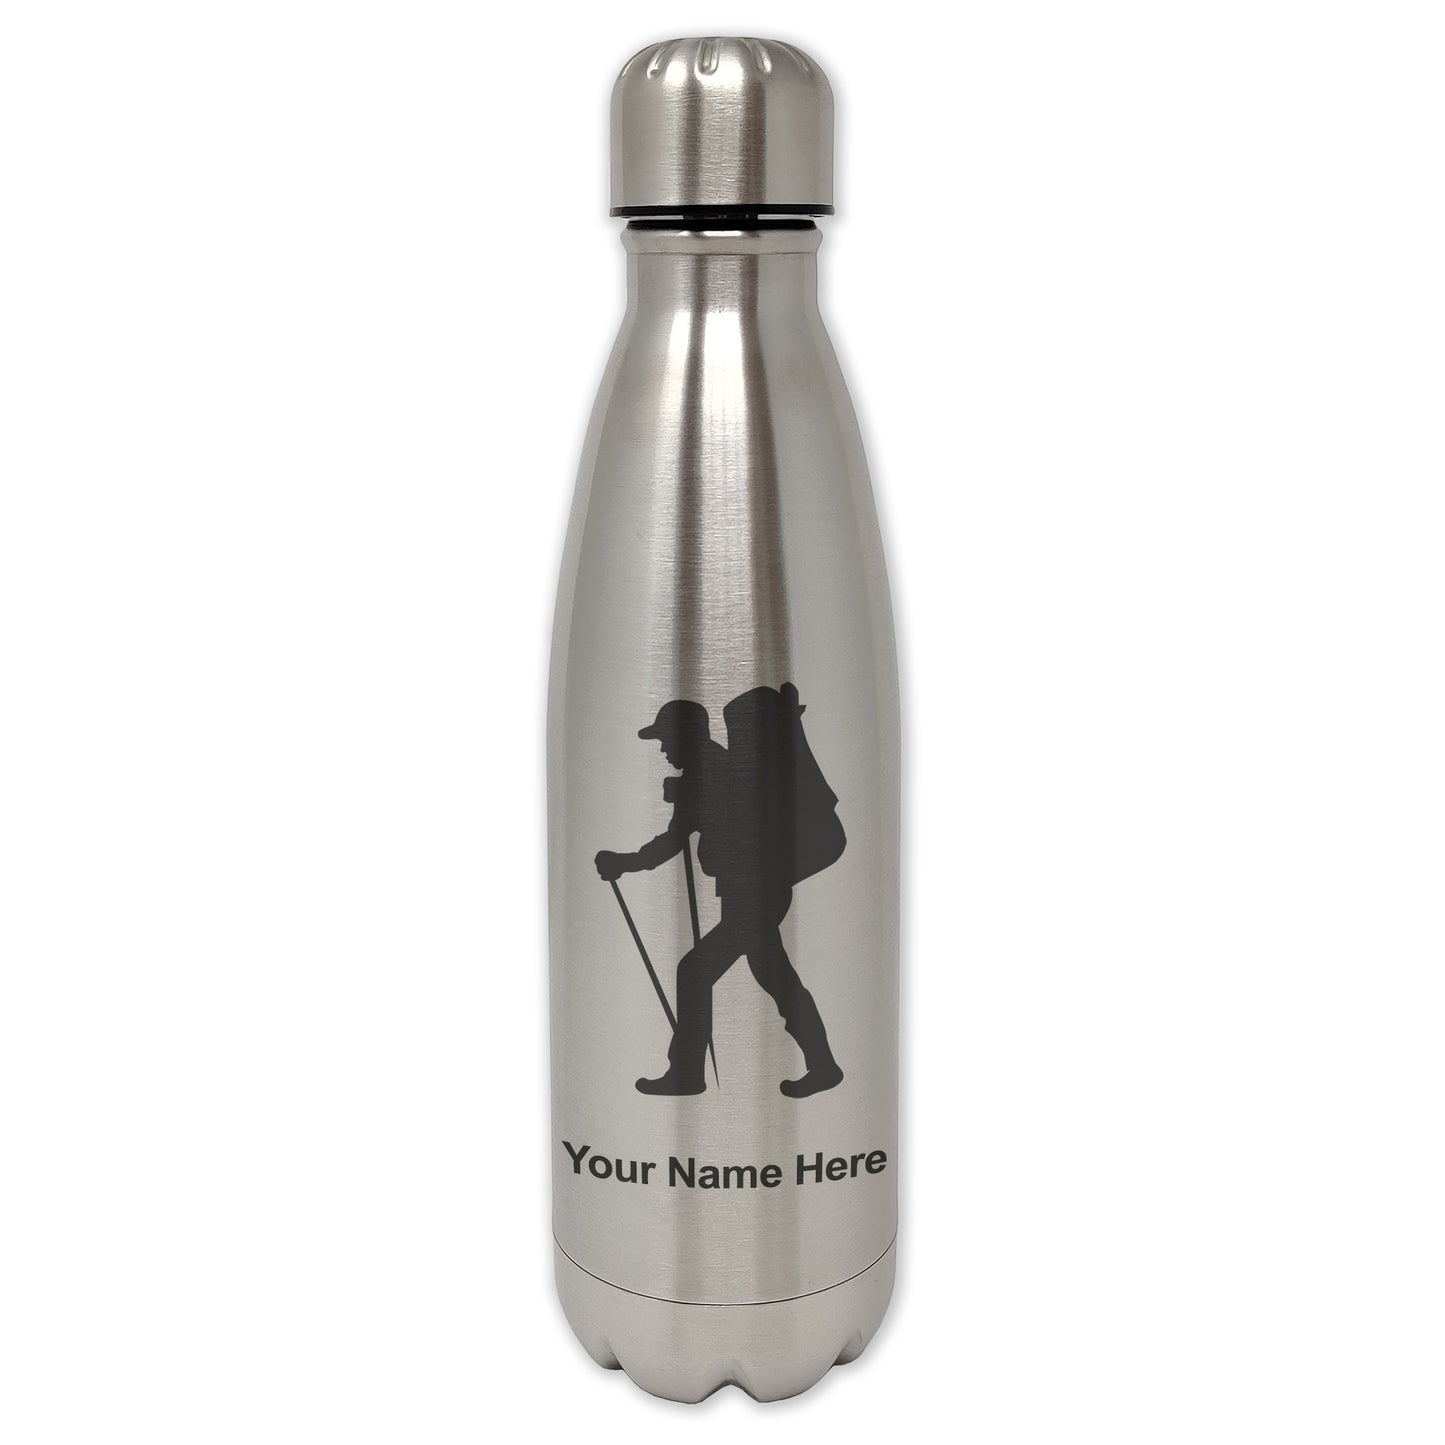 LaserGram Double Wall Water Bottle, Hiker Man, Personalized Engraving Included